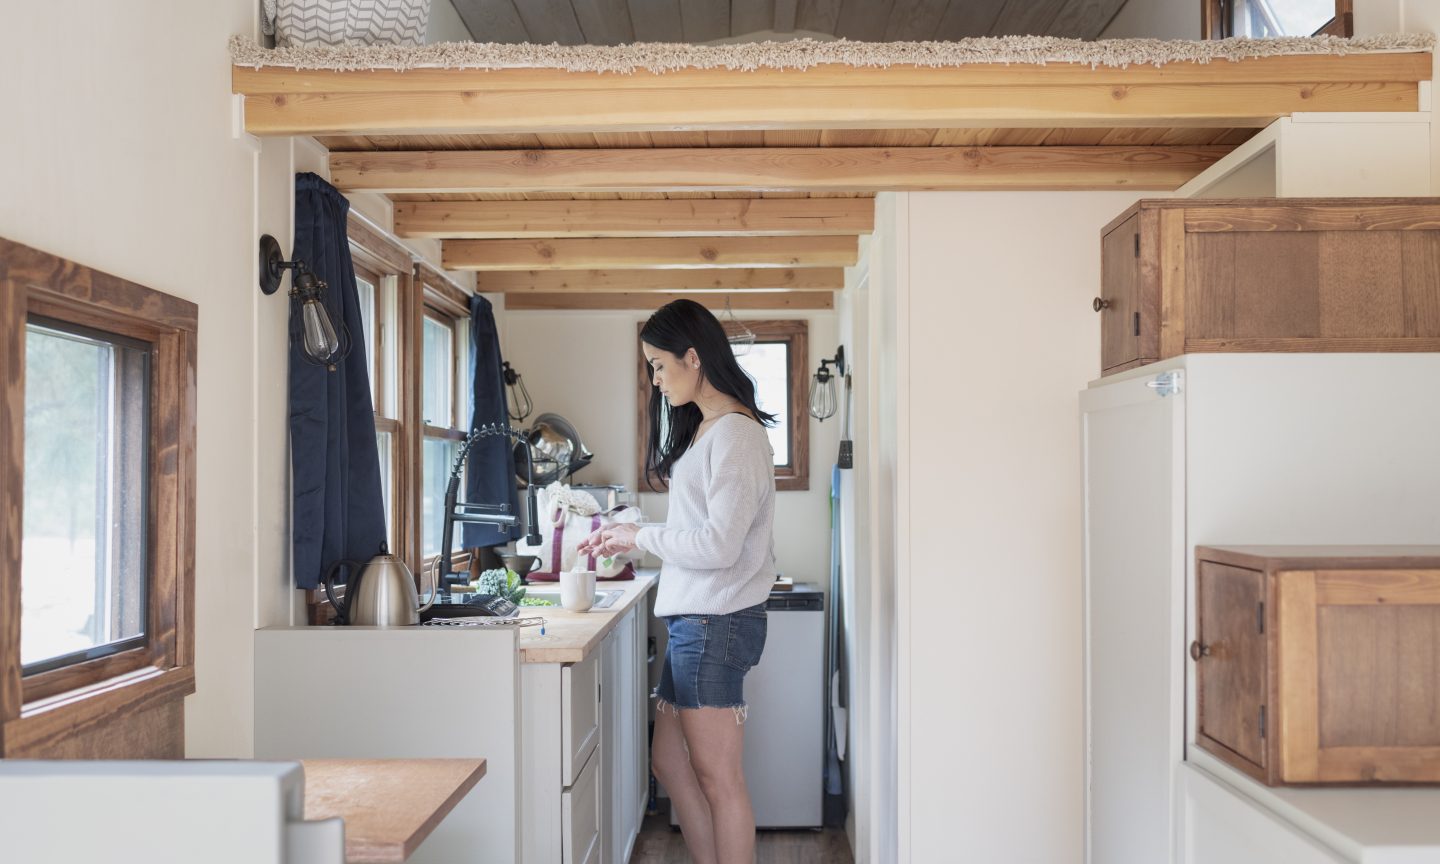 What to Know About Buying a Tiny House - NerdWallet